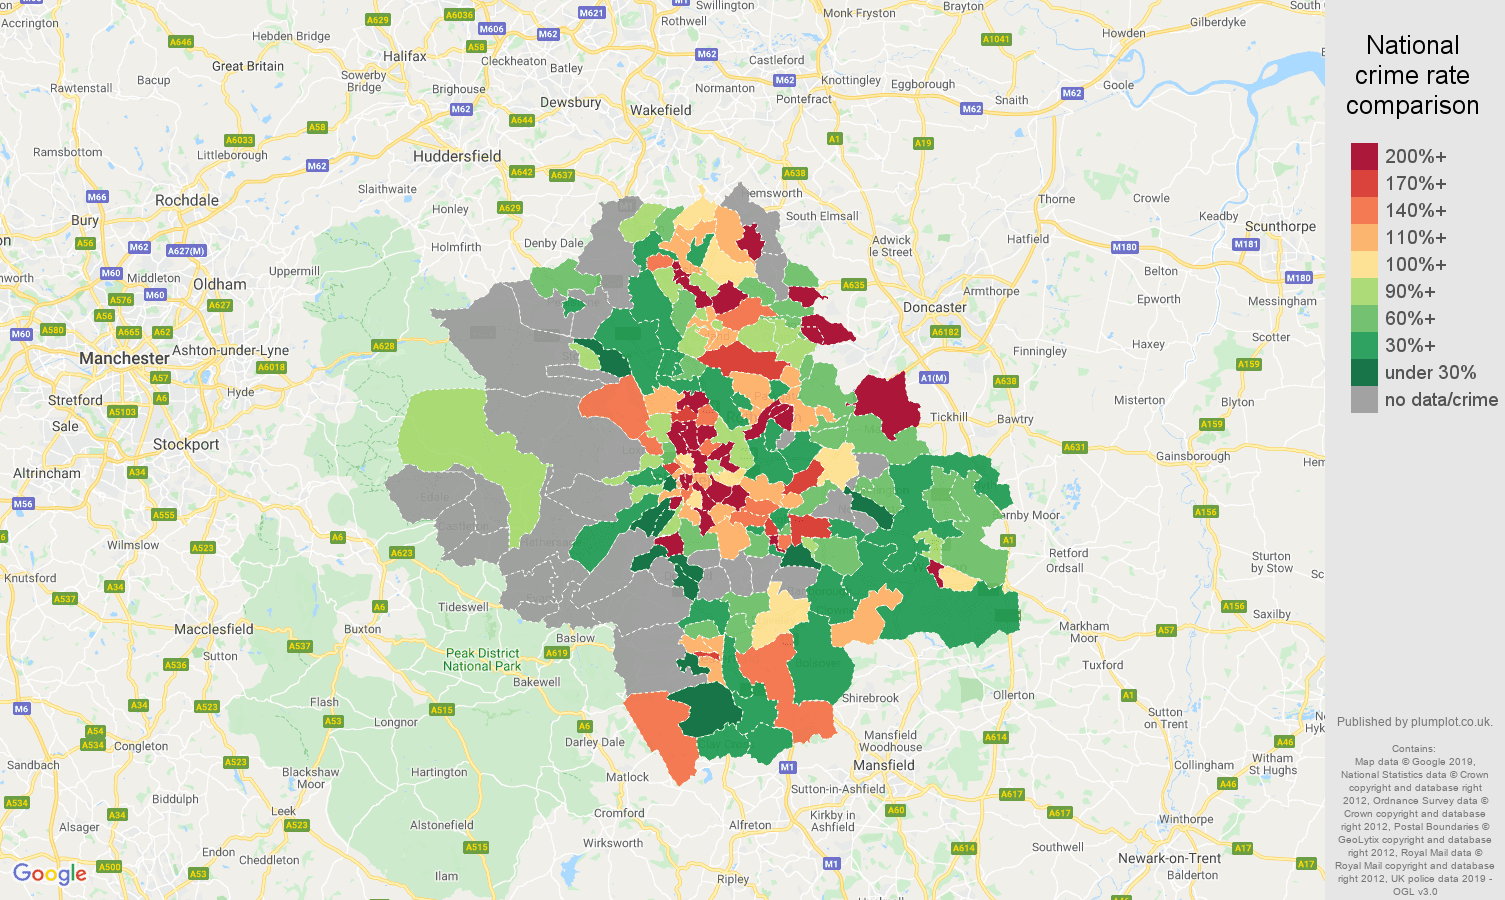 Sheffield possession of weapons crime rate comparison map